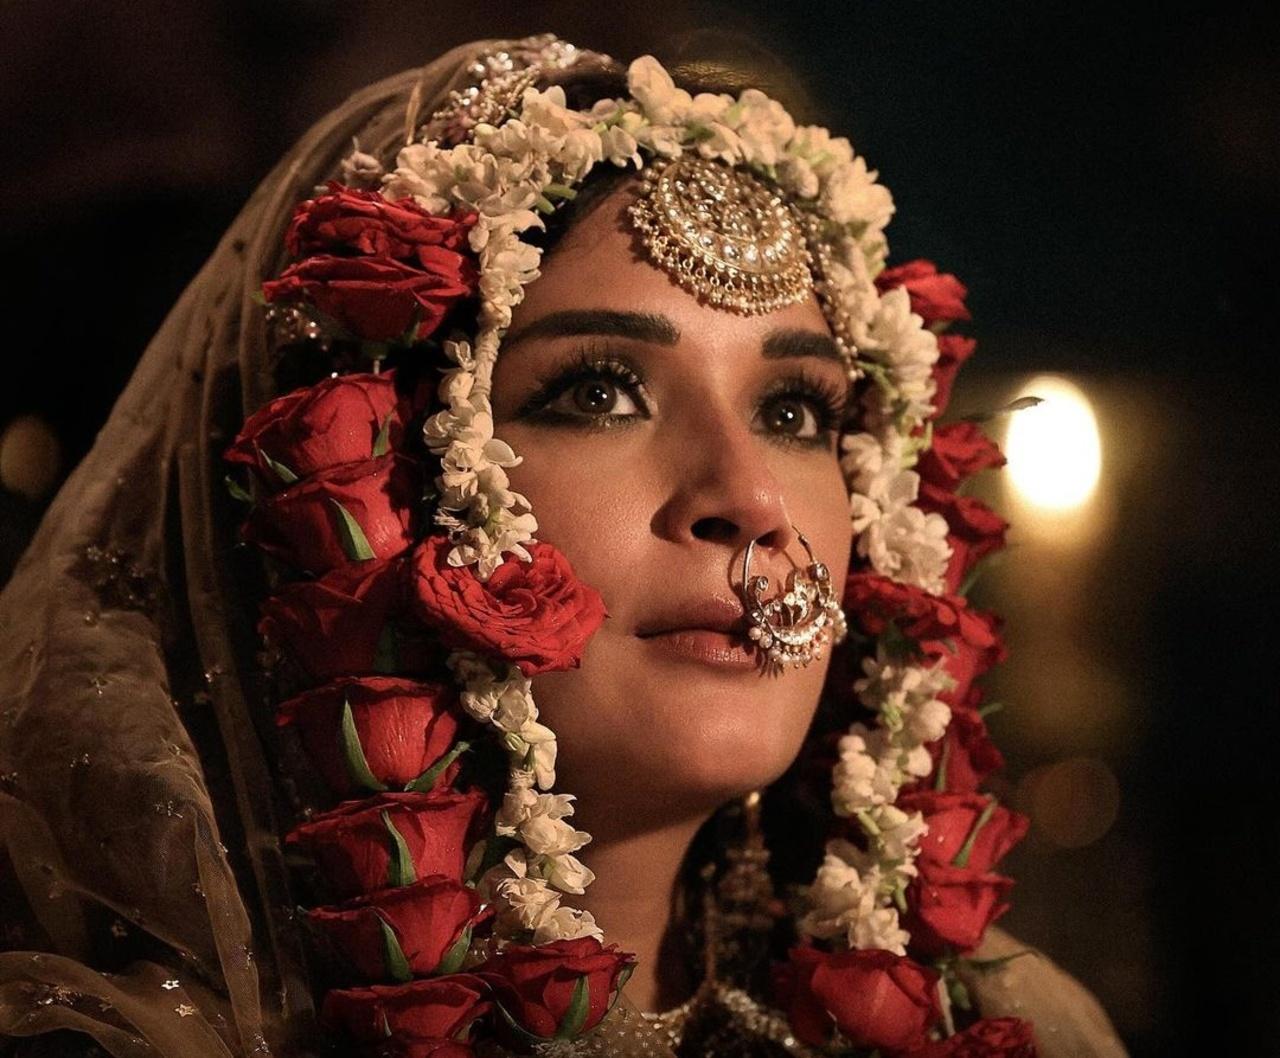 Richa Chadha plays Lajjo, whose resilience echoes in the halls of Shahi Mahal. In an interview, Richa revealed that her character has an addiction problem. 